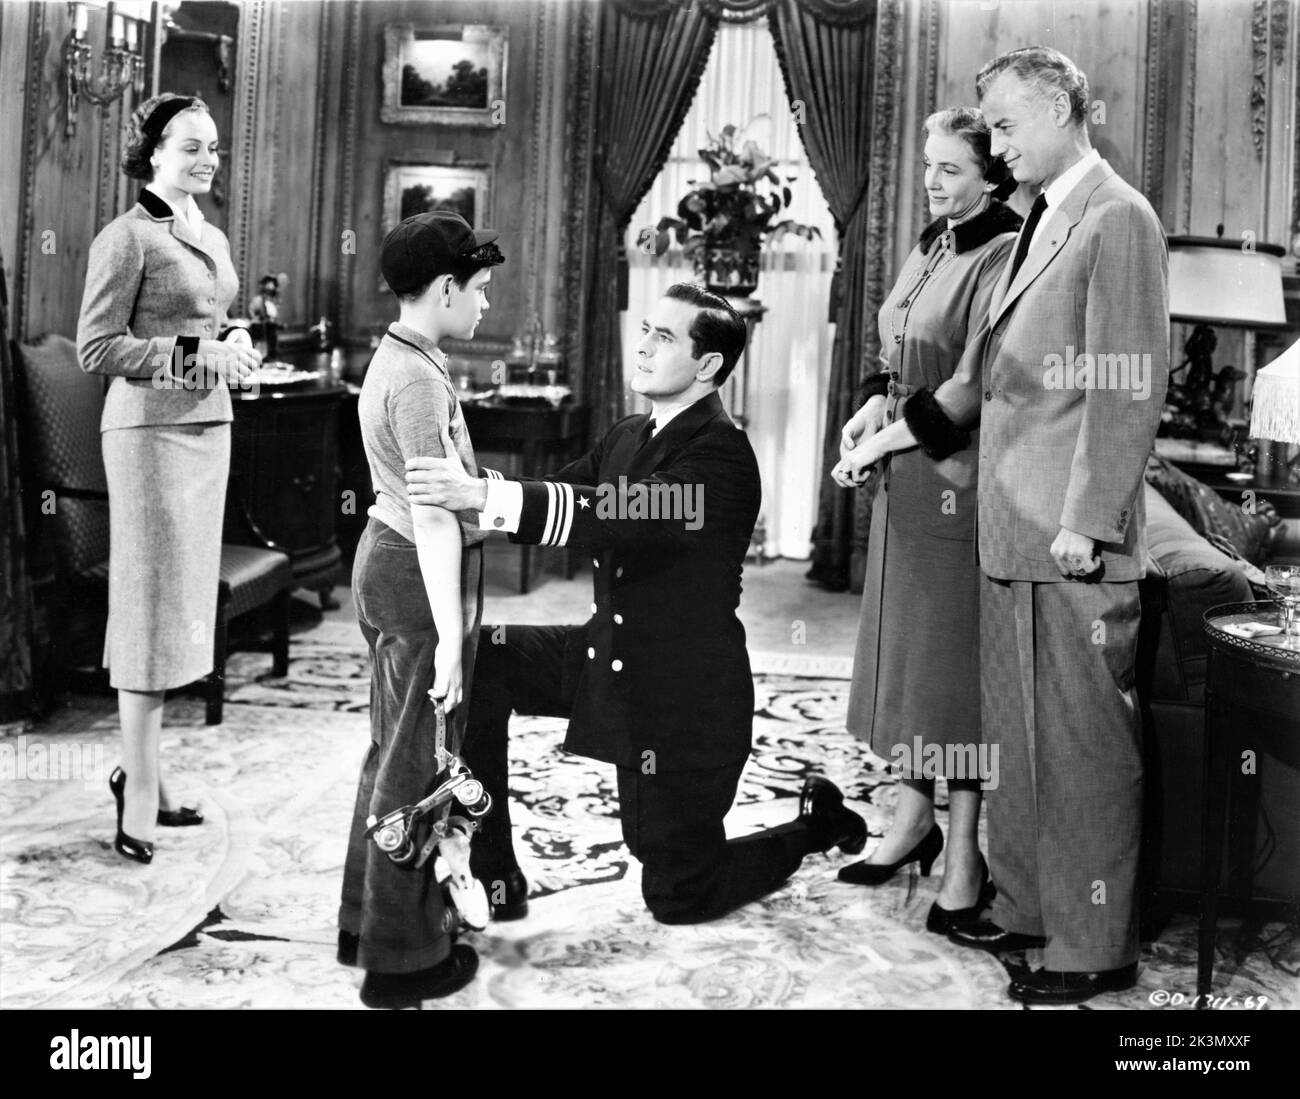 VICTORIA SHAW REX THOMPSON TYRONE POWER FRIEDA INESCORT and SHEPPERD STRUDWICK in THE EDDY DUCHIN STORY 1956 director GEORGE SIDNEY story Leo Katcher screenplay Samuel A. Taylor piano playing by Carmen Cavallero music George Duning producer Jerry Wald Columbia Pictures Stock Photo